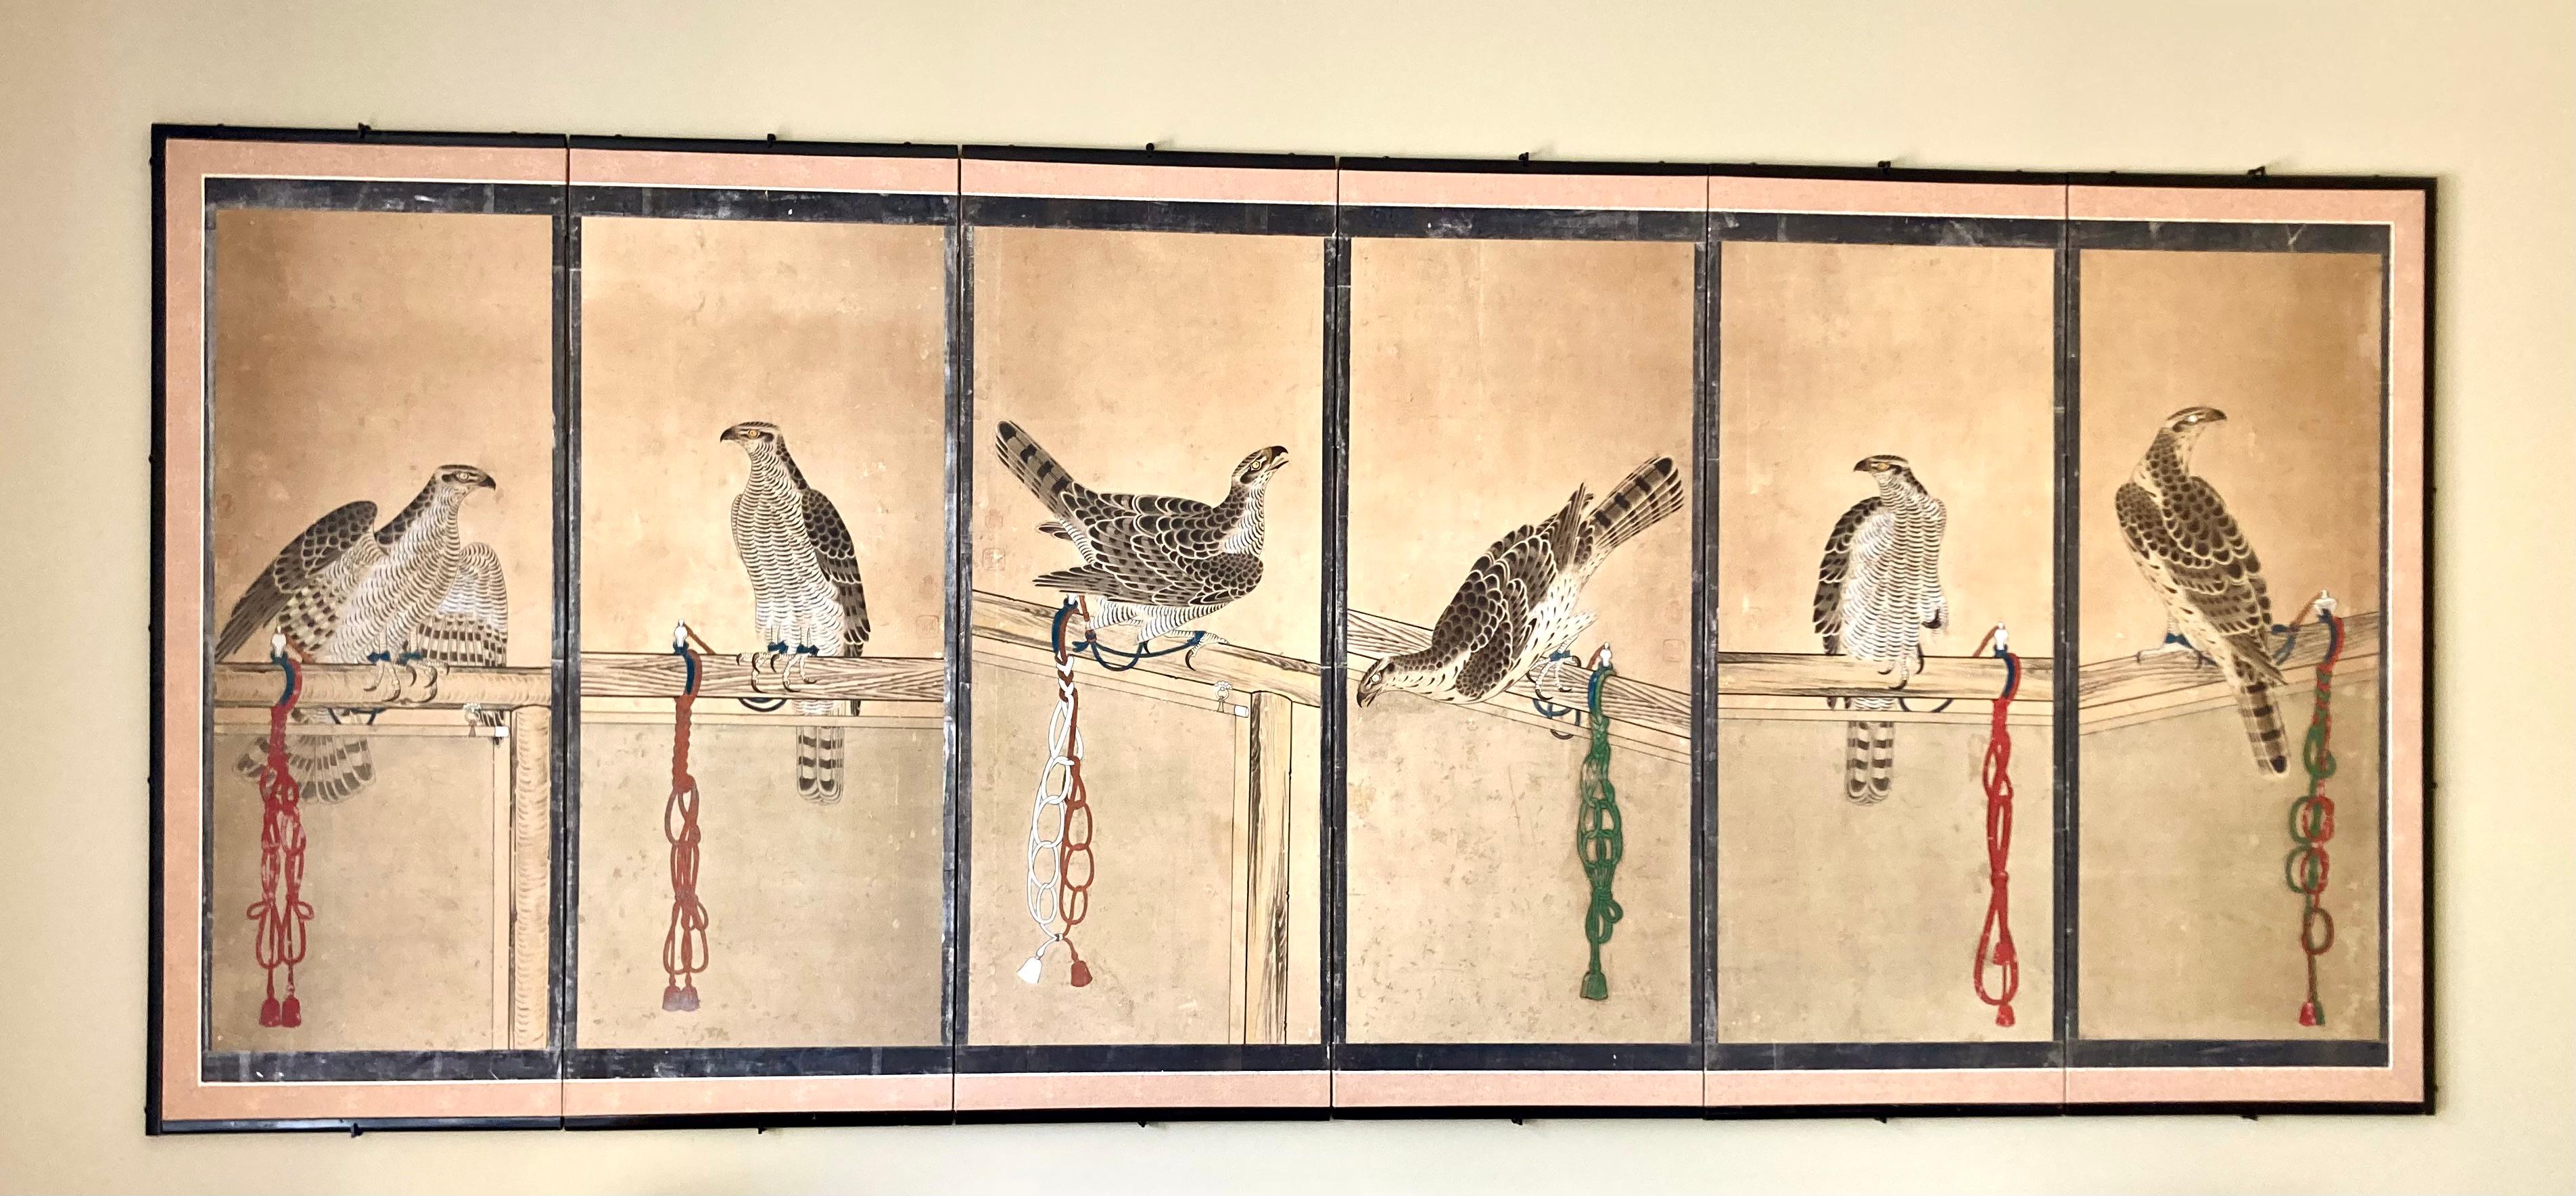 A striking Japanese antique Edo period screen painting in ink and colors on paper, each of the 6 framed panels featuring a goshawk (hawk) tethered to a perch by a silk cord with the distinctive knots of various samurai clans, with silver leaf